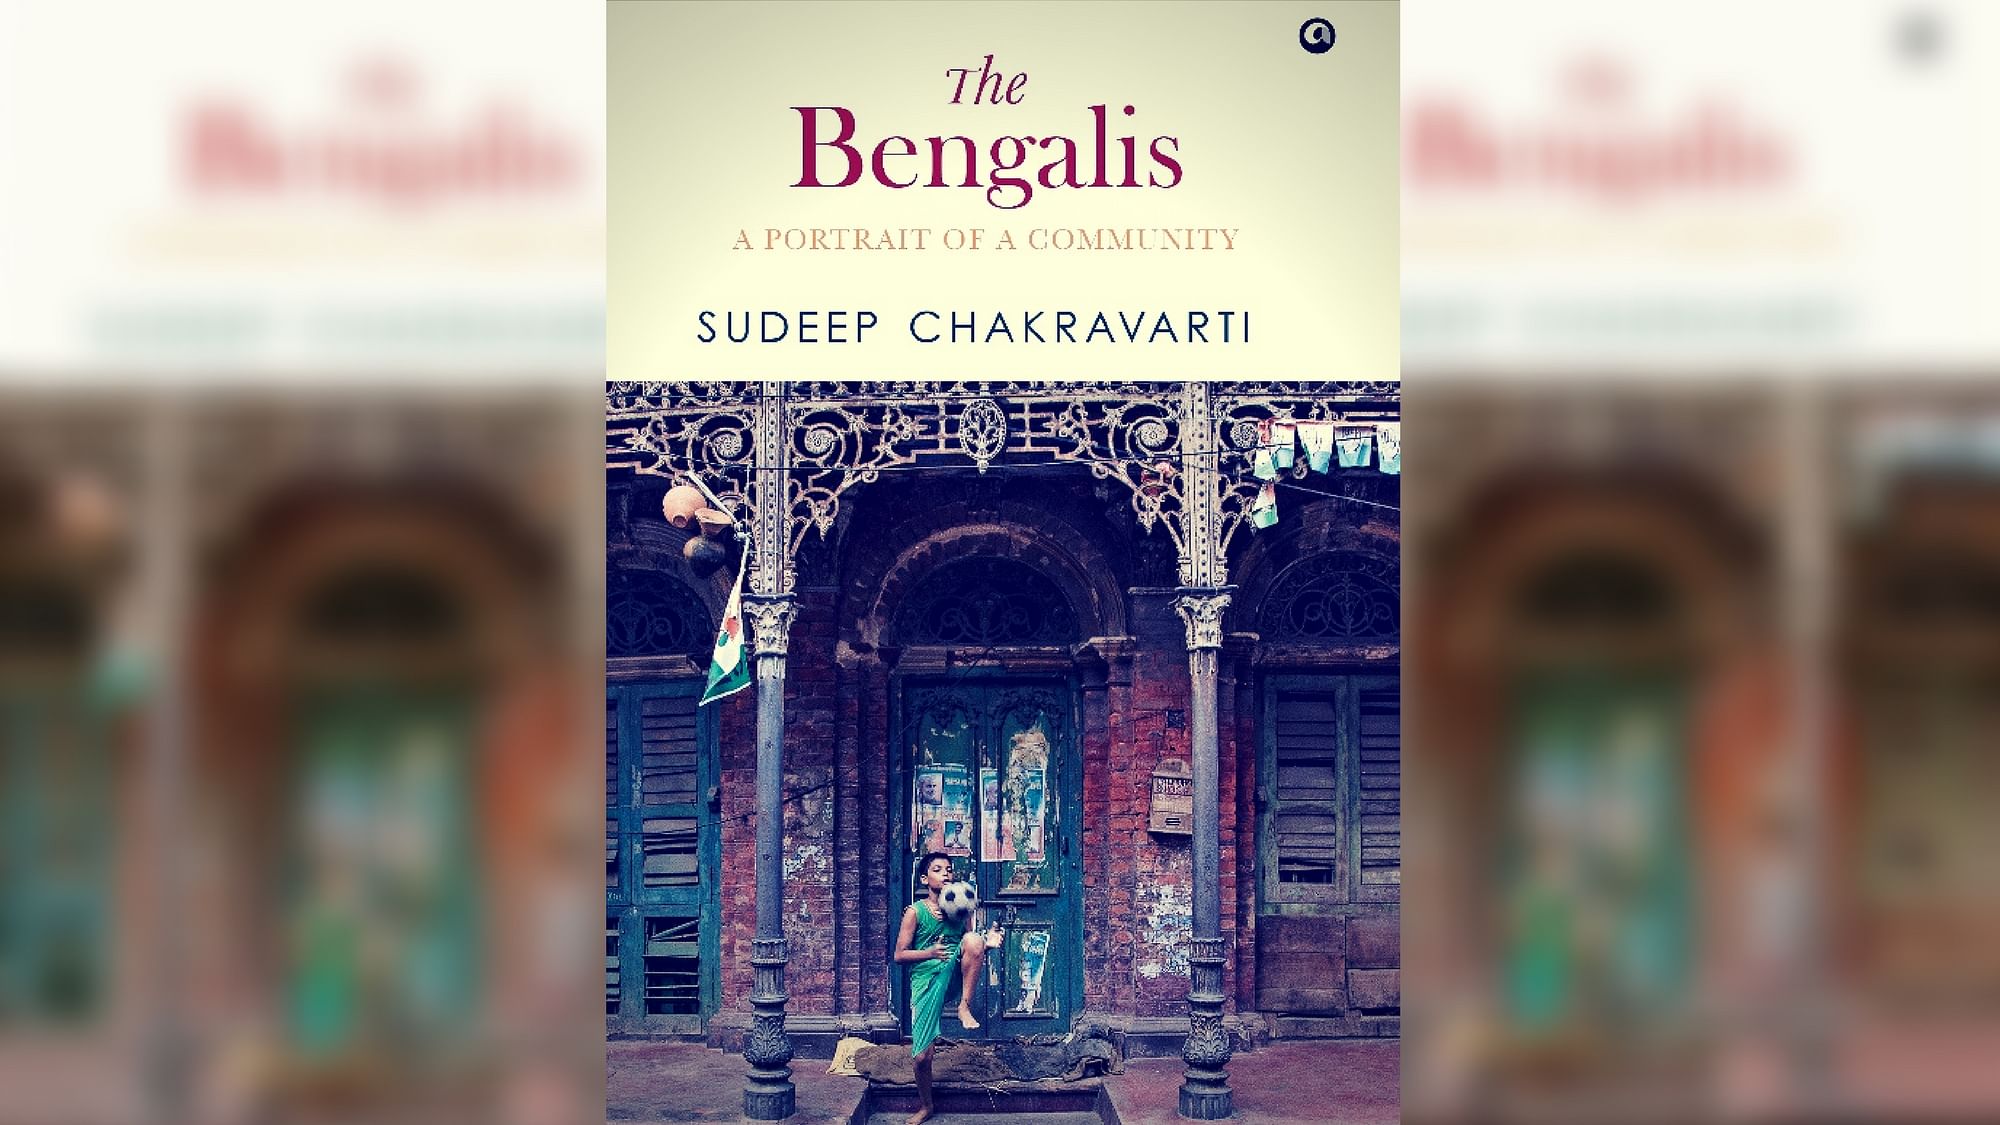 The author addresses everything Bengali – their culture, cuisine, politics, social mores, literature, and even the thorny issues of their history, ethnicity and religion.